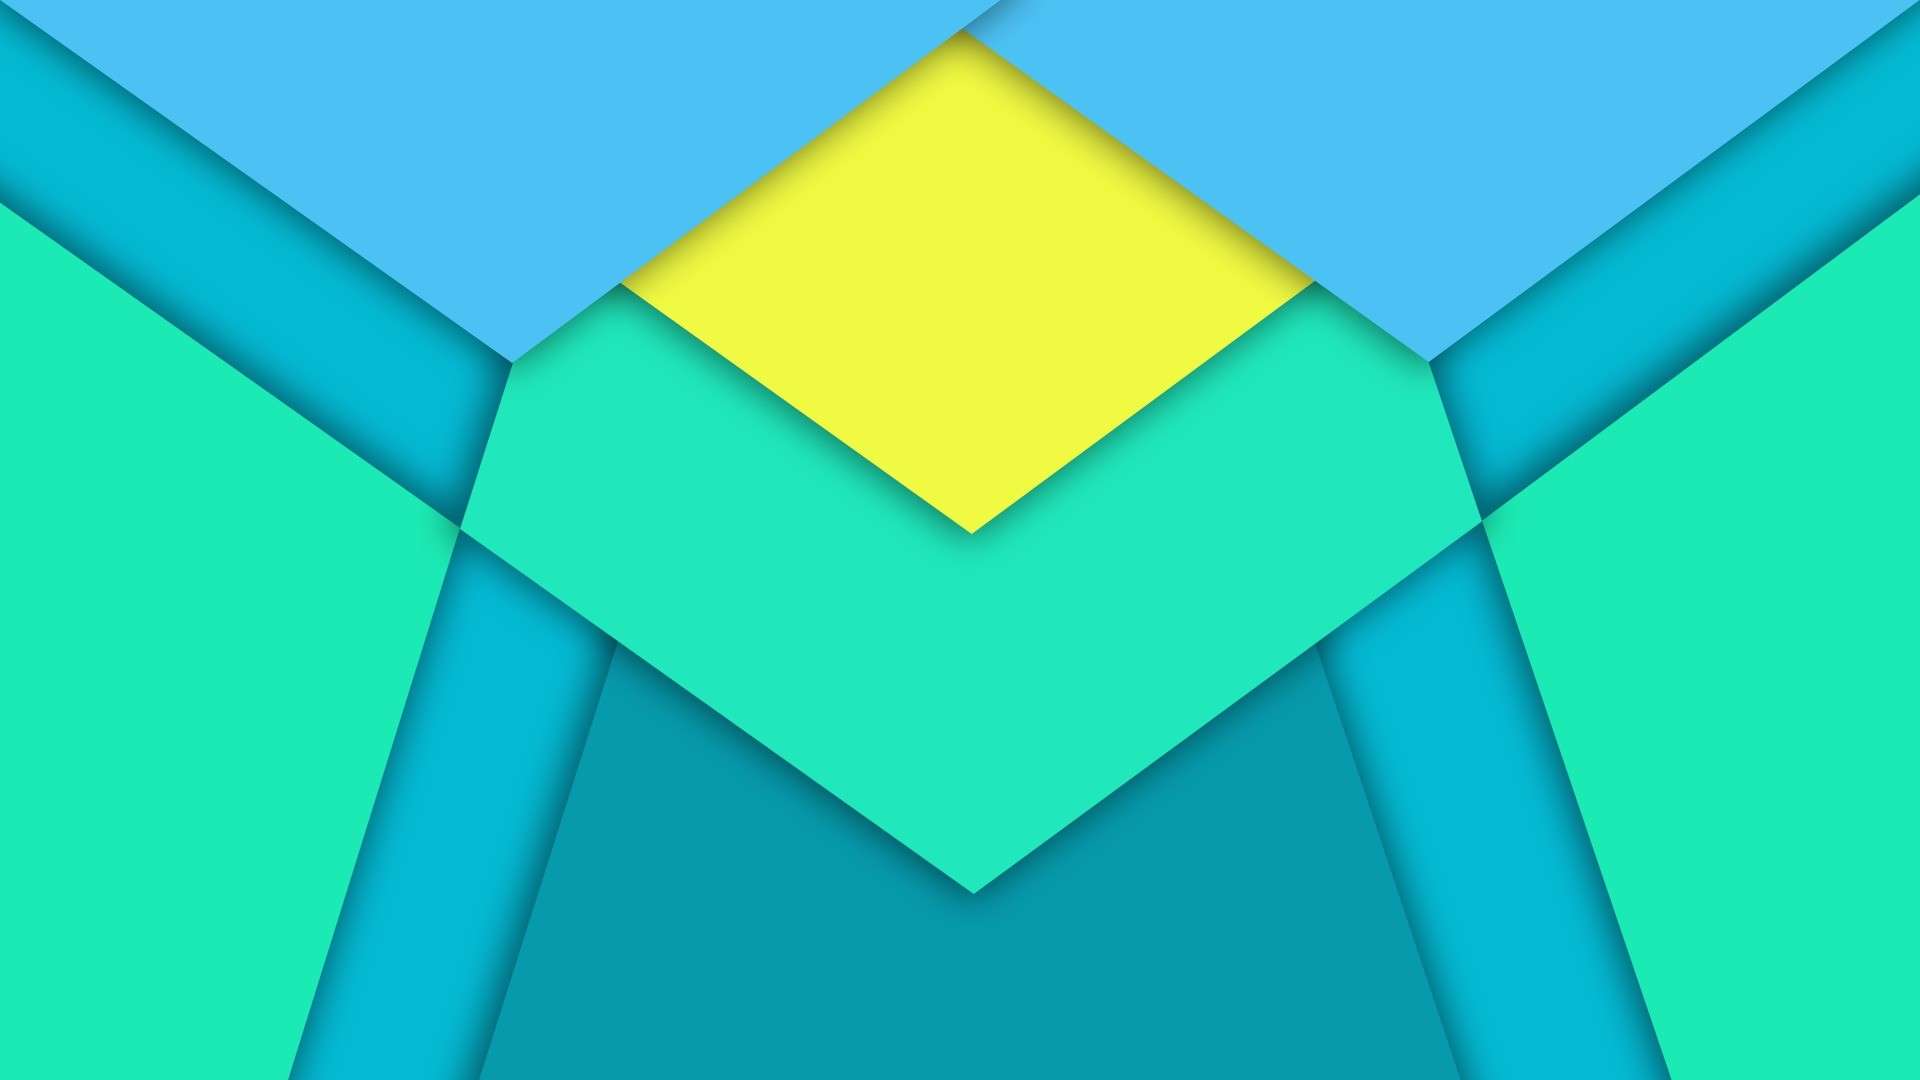 android material design wallpaper,blue,green,aqua,turquoise,line